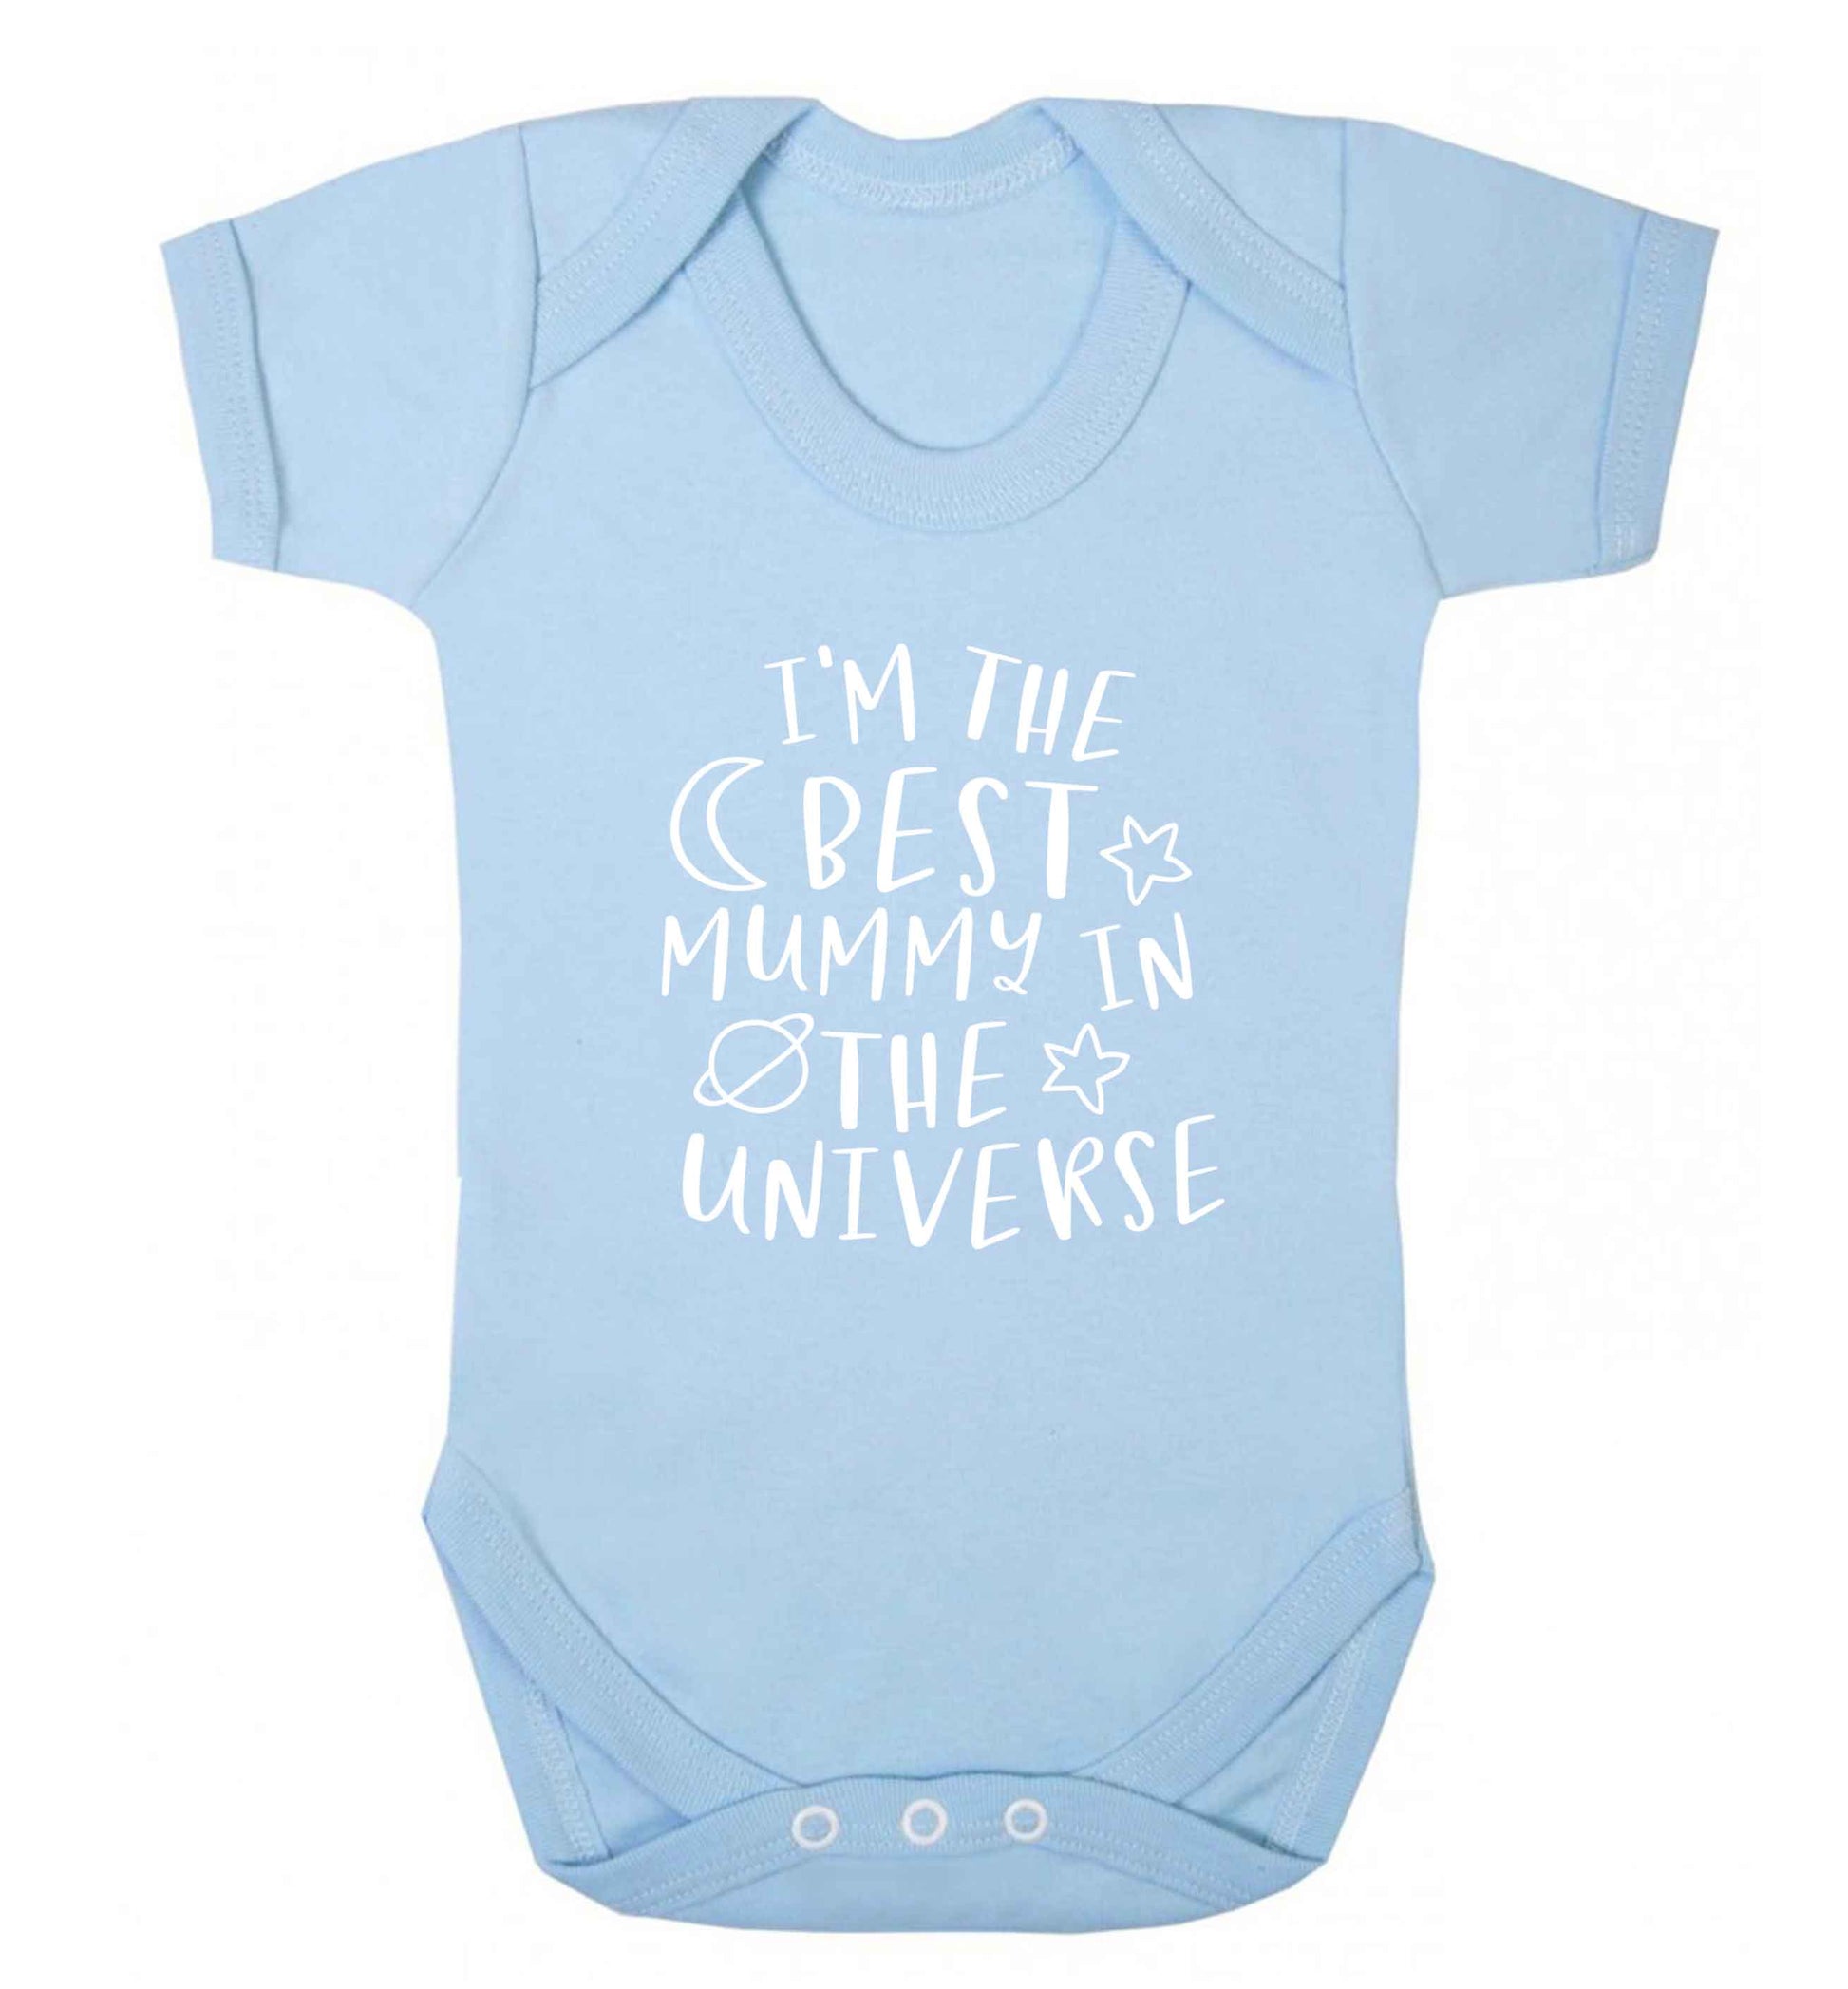 I'm the best mummy in the universe baby vest pale blue 18-24 months